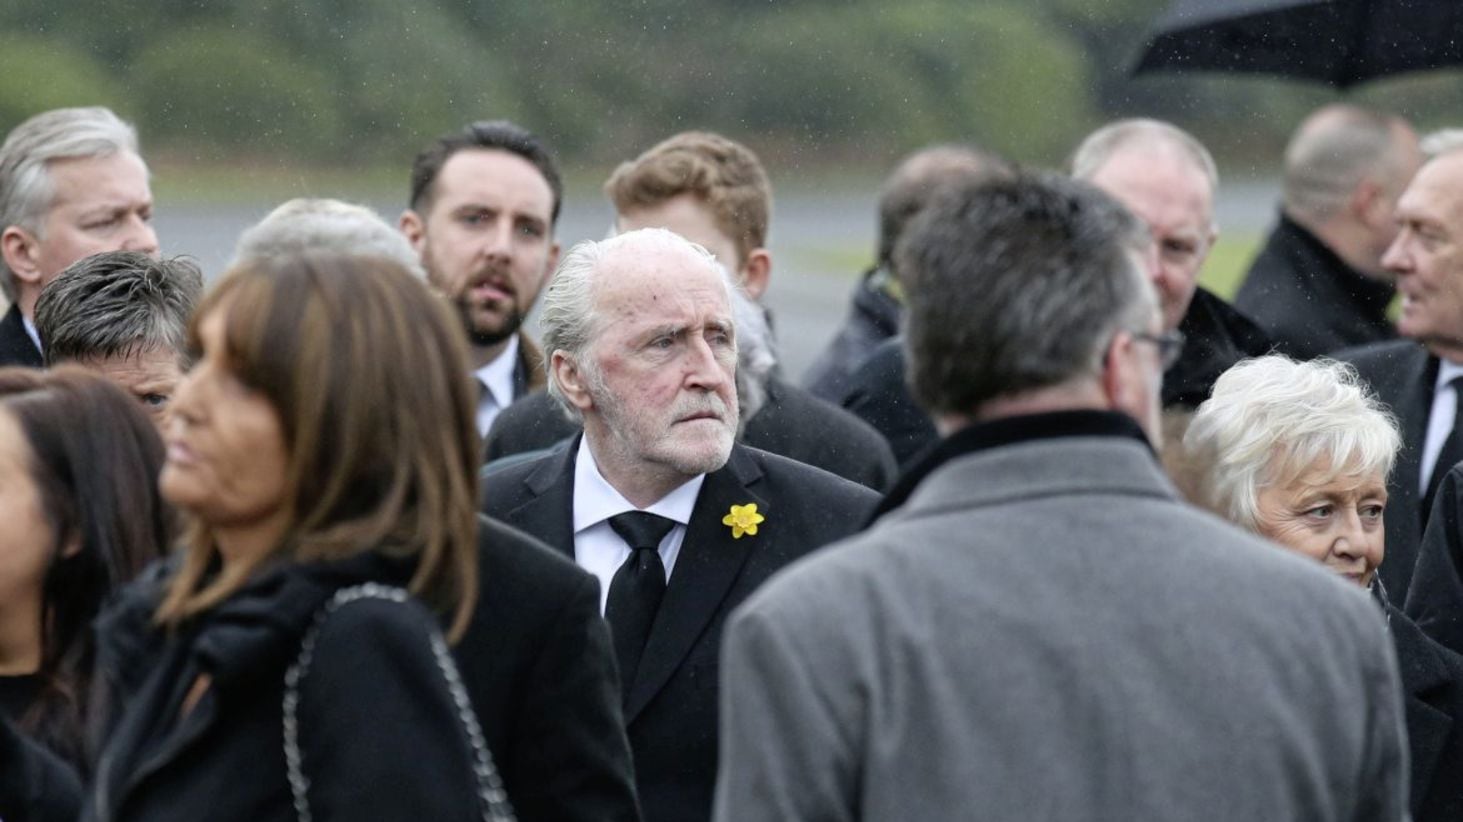 Former Celtic star Danny McGrain arriving for the funeral of another Celtic great, Tommy Gemmell, at Daldowie Crematorium in Uddingston, South Lanarkshire on Friday March 10 2017